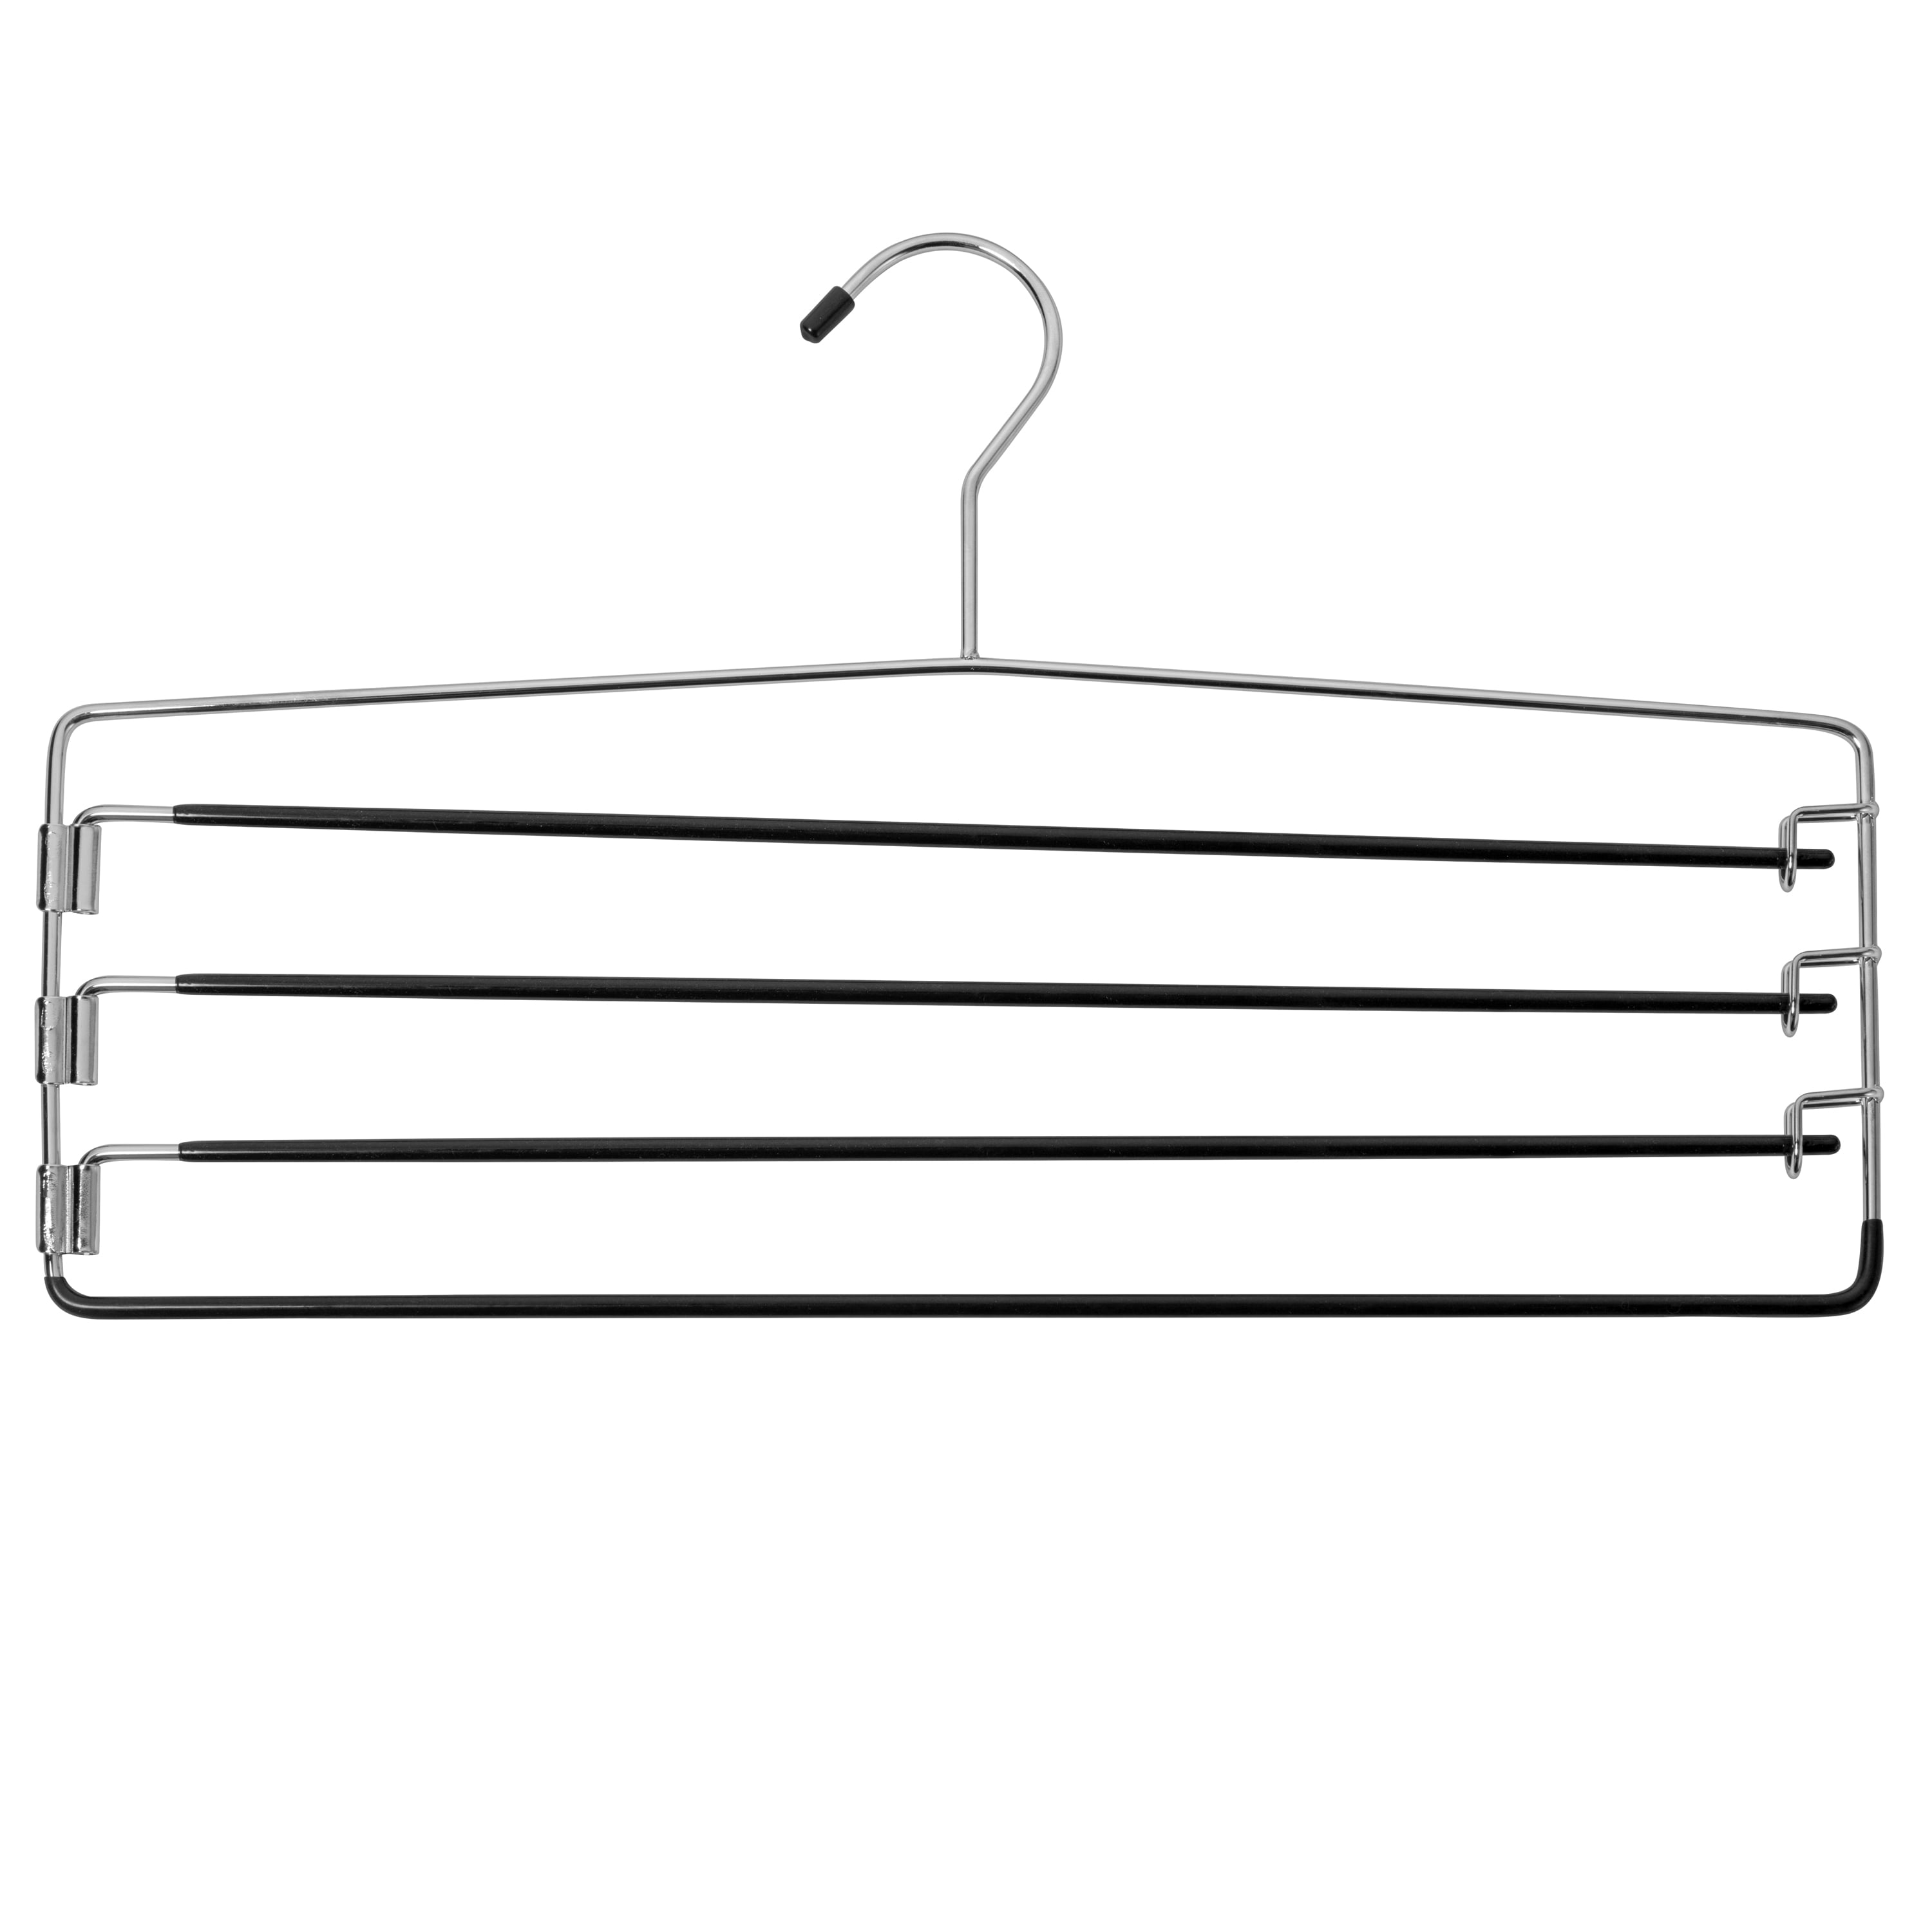 Set of 3 Hanger For pants With Clips Space Saving 4 Tier Trouser Skirt Hangers 